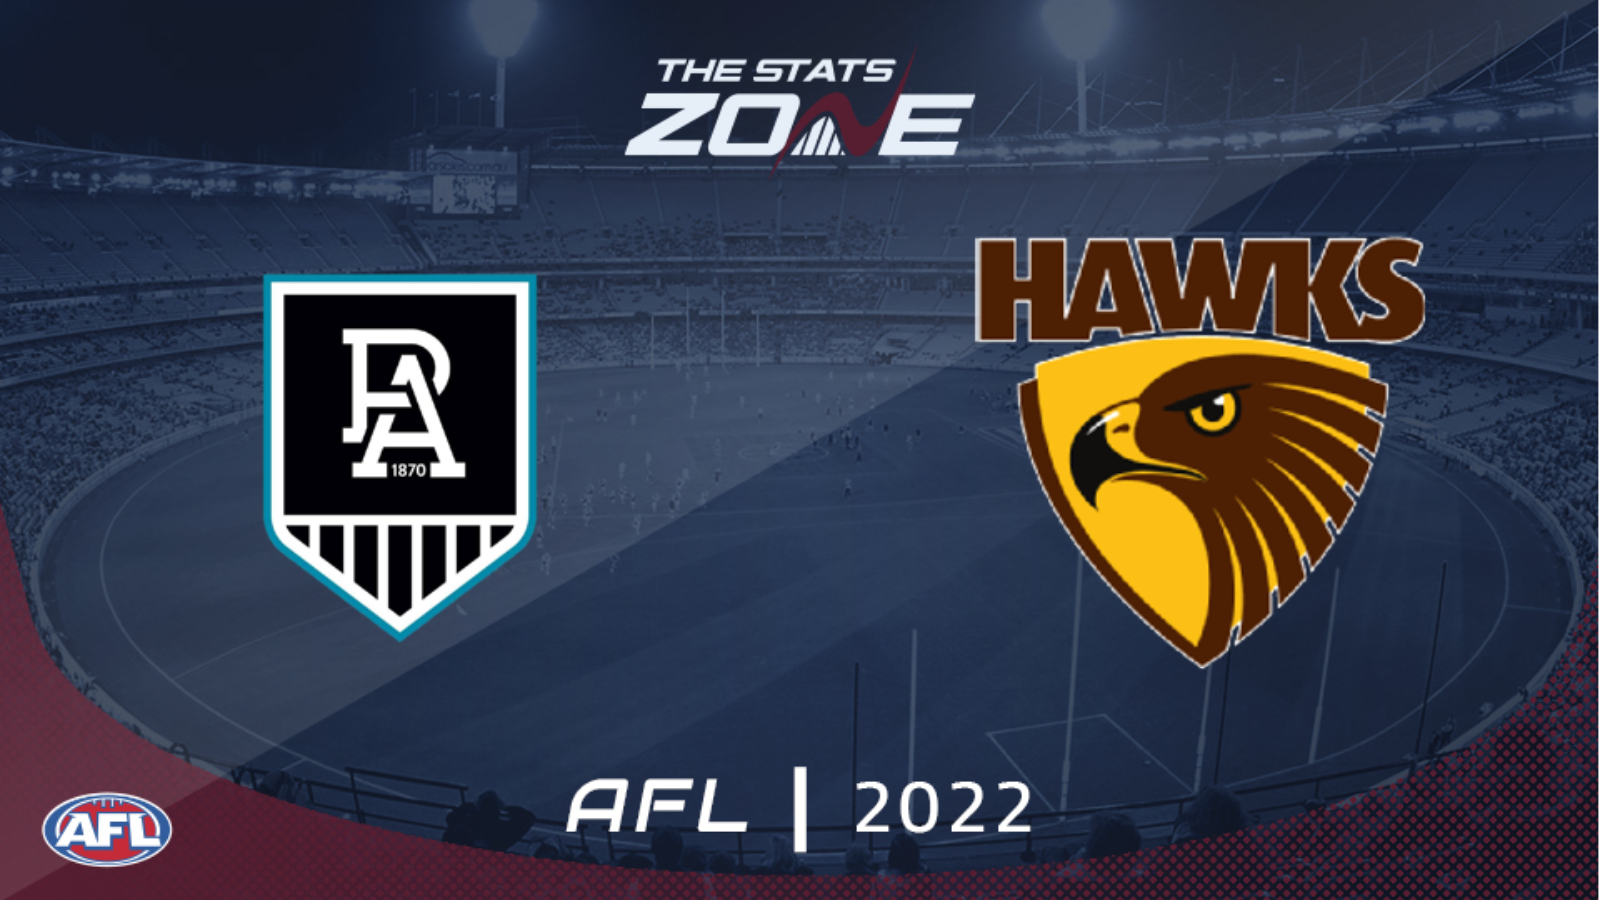 Port Adelaide Vs Hawthorn Round 2 Preview And Prediction 2022 Afl The Stats Zone